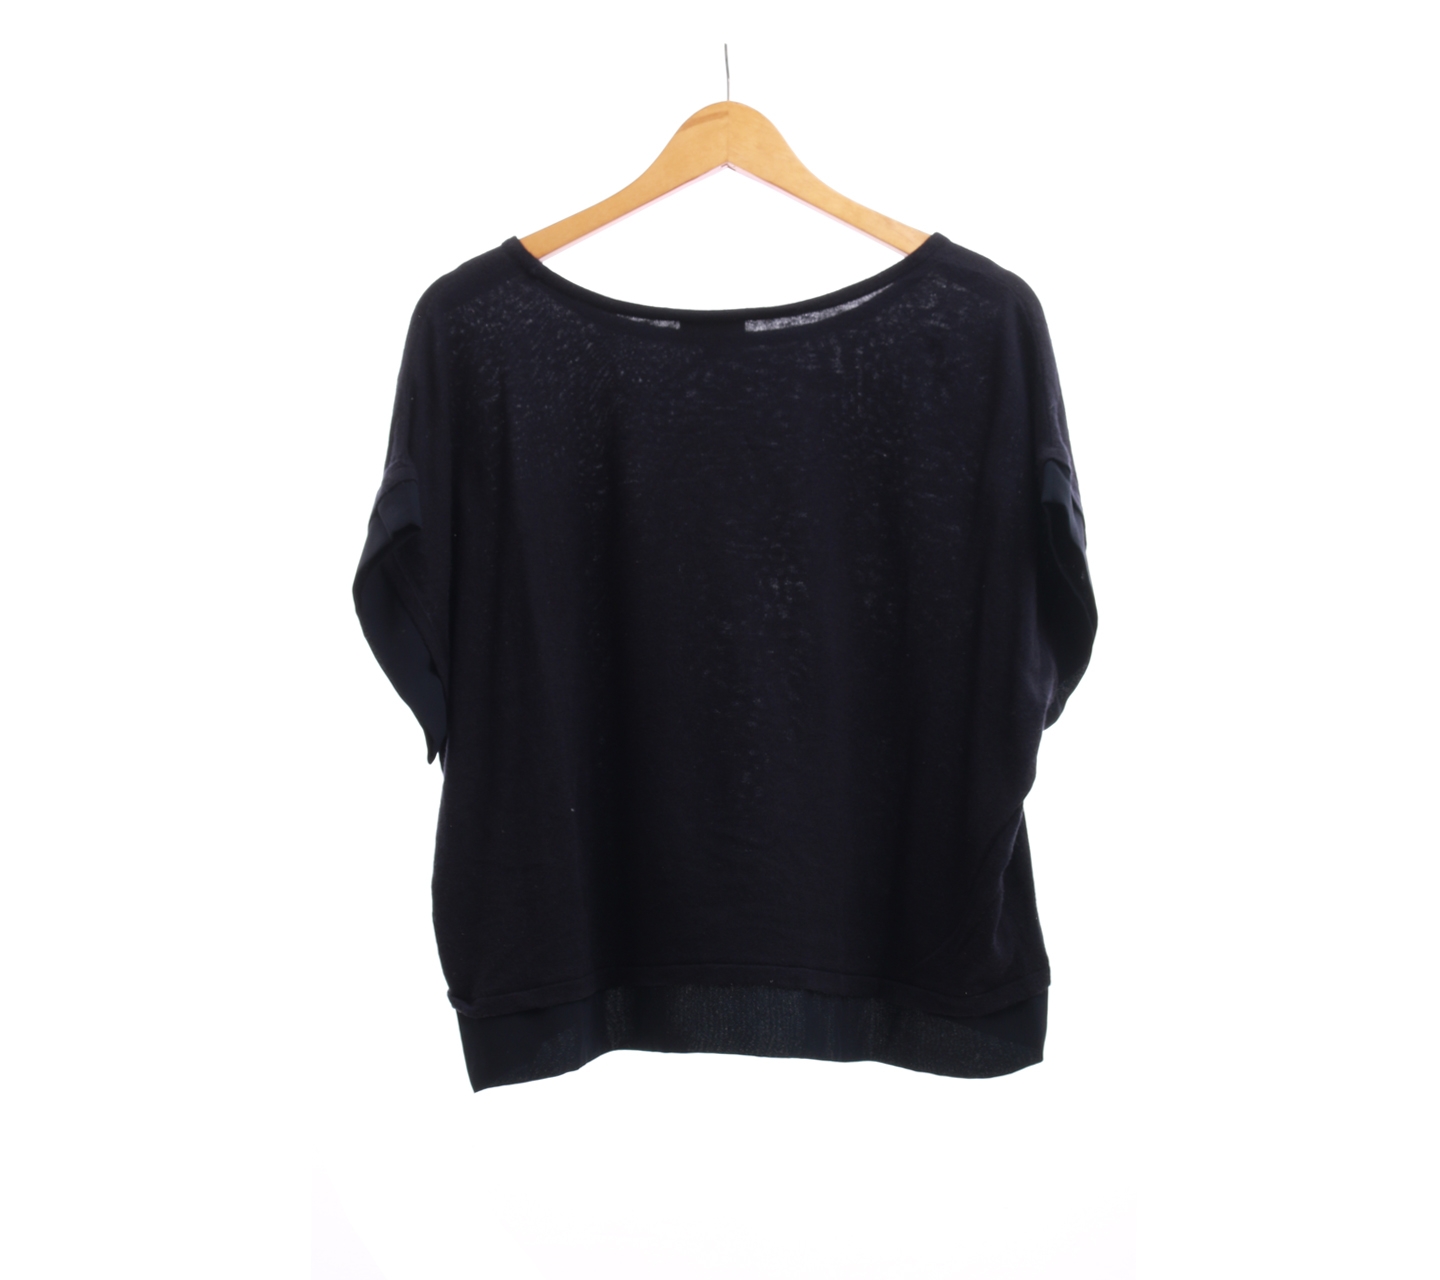 The Limeted Black Crop Blouse